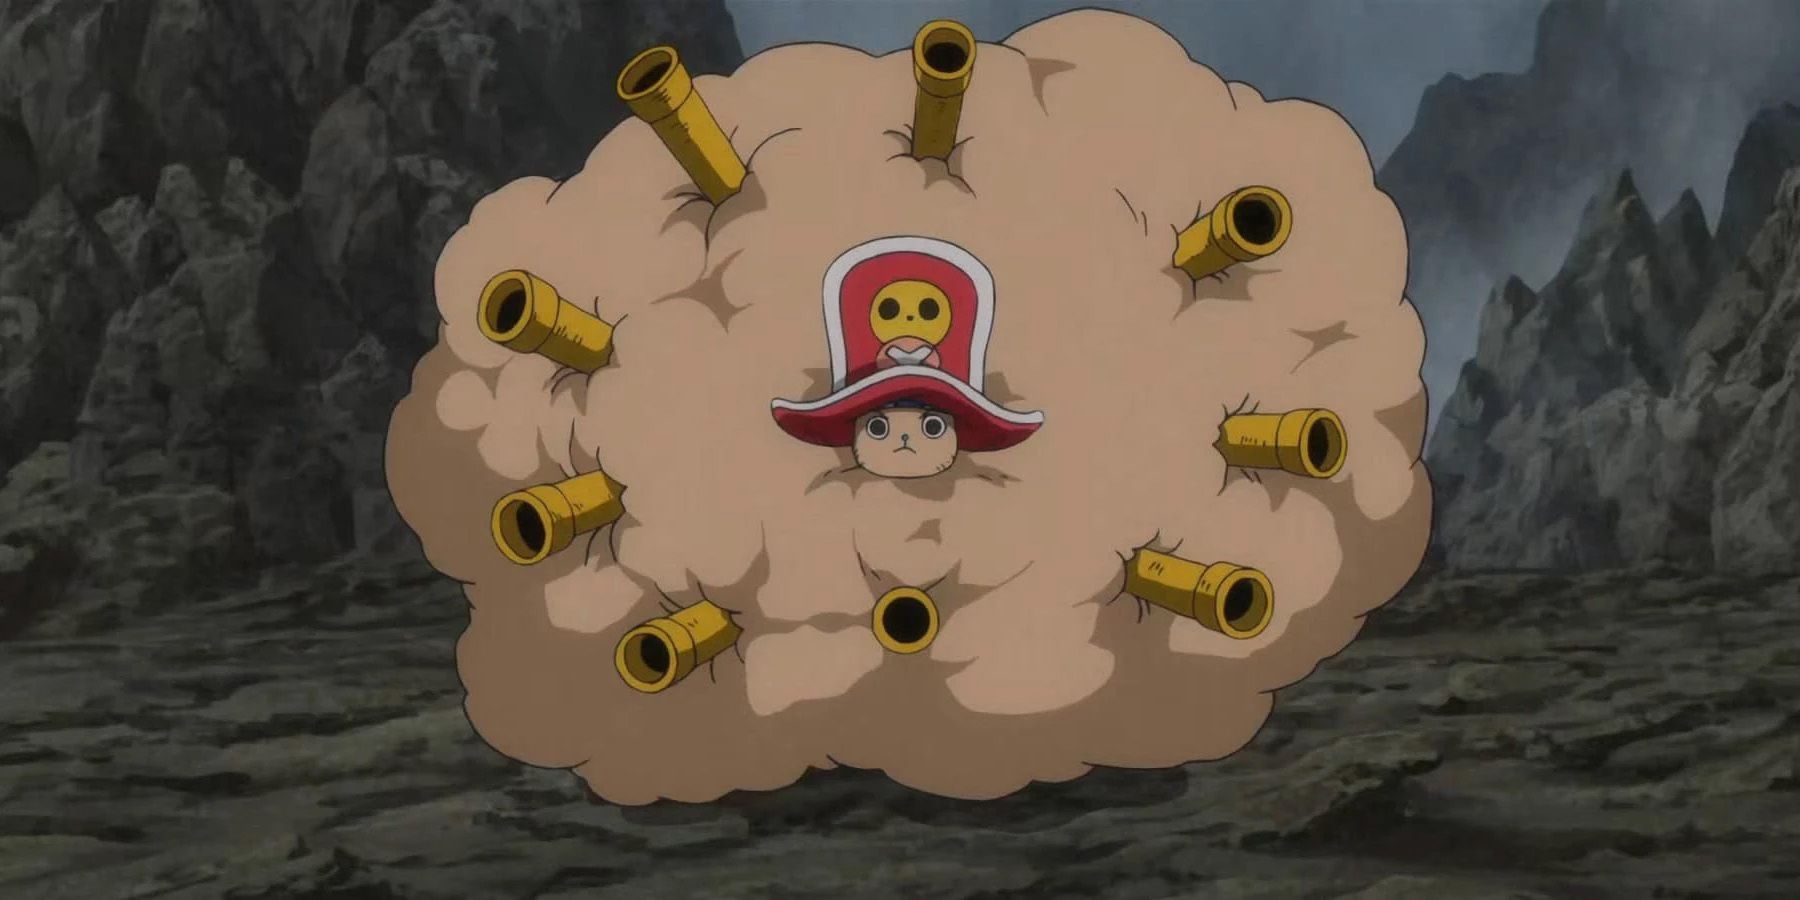 Why does Chopper have different forms in 'One Piece' when he uses his devil  fruit abilities? Do other Zoan users have multiple forms as well? - Quora